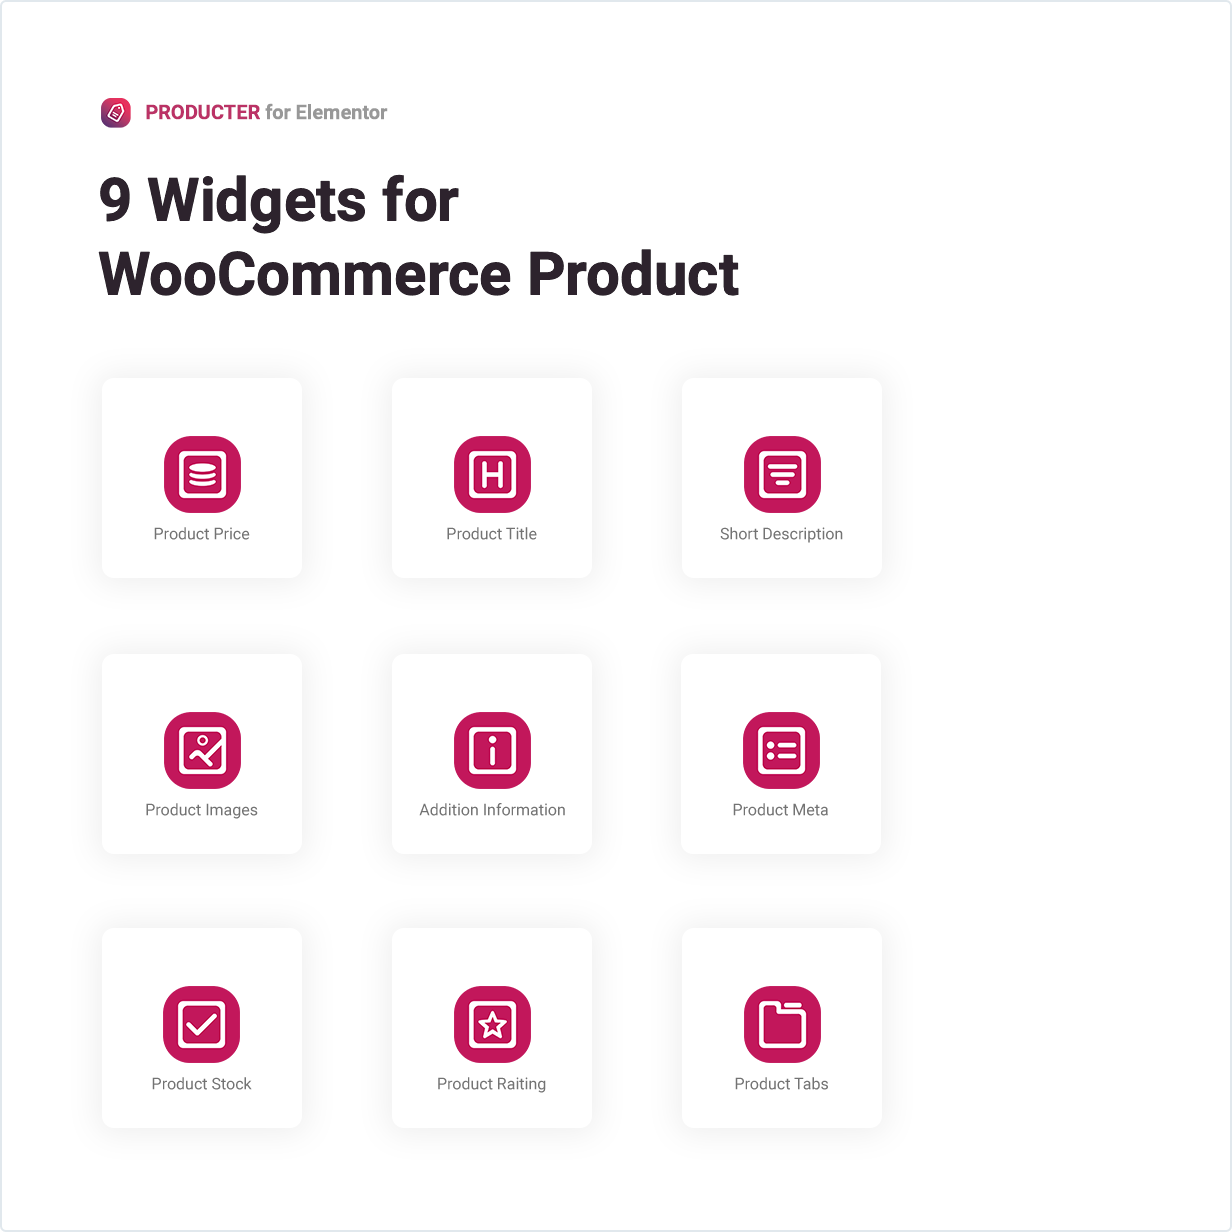 9 Widgets for WooCommerce Product